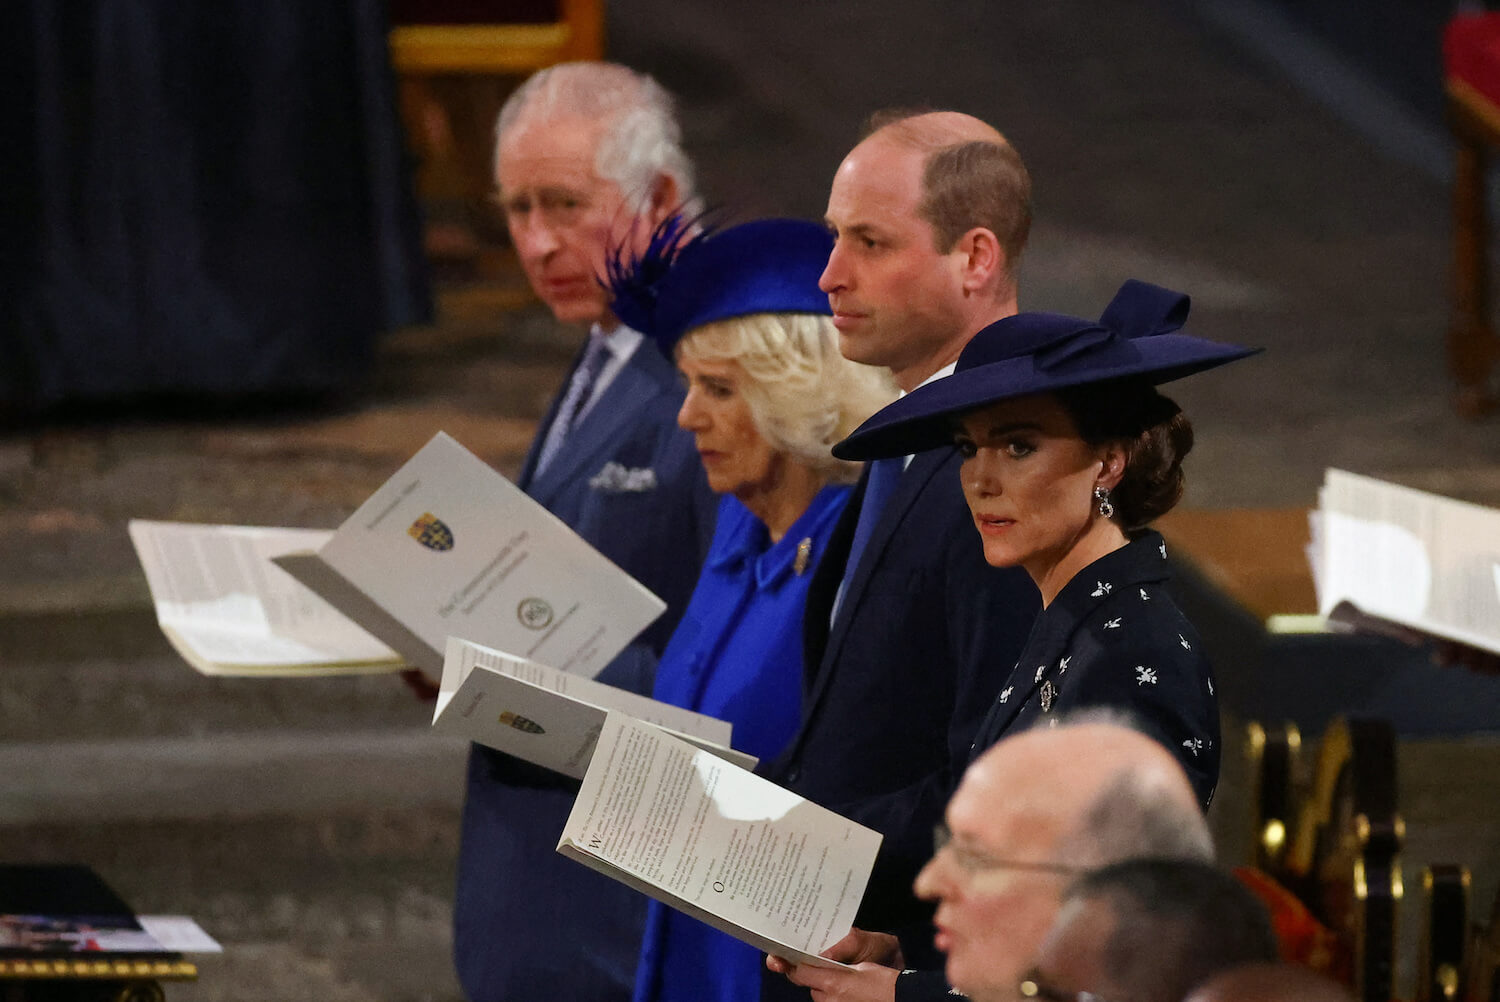 Kate Middleton wears a hat and looks to the side during commonwealth day service as she stands beside royal family